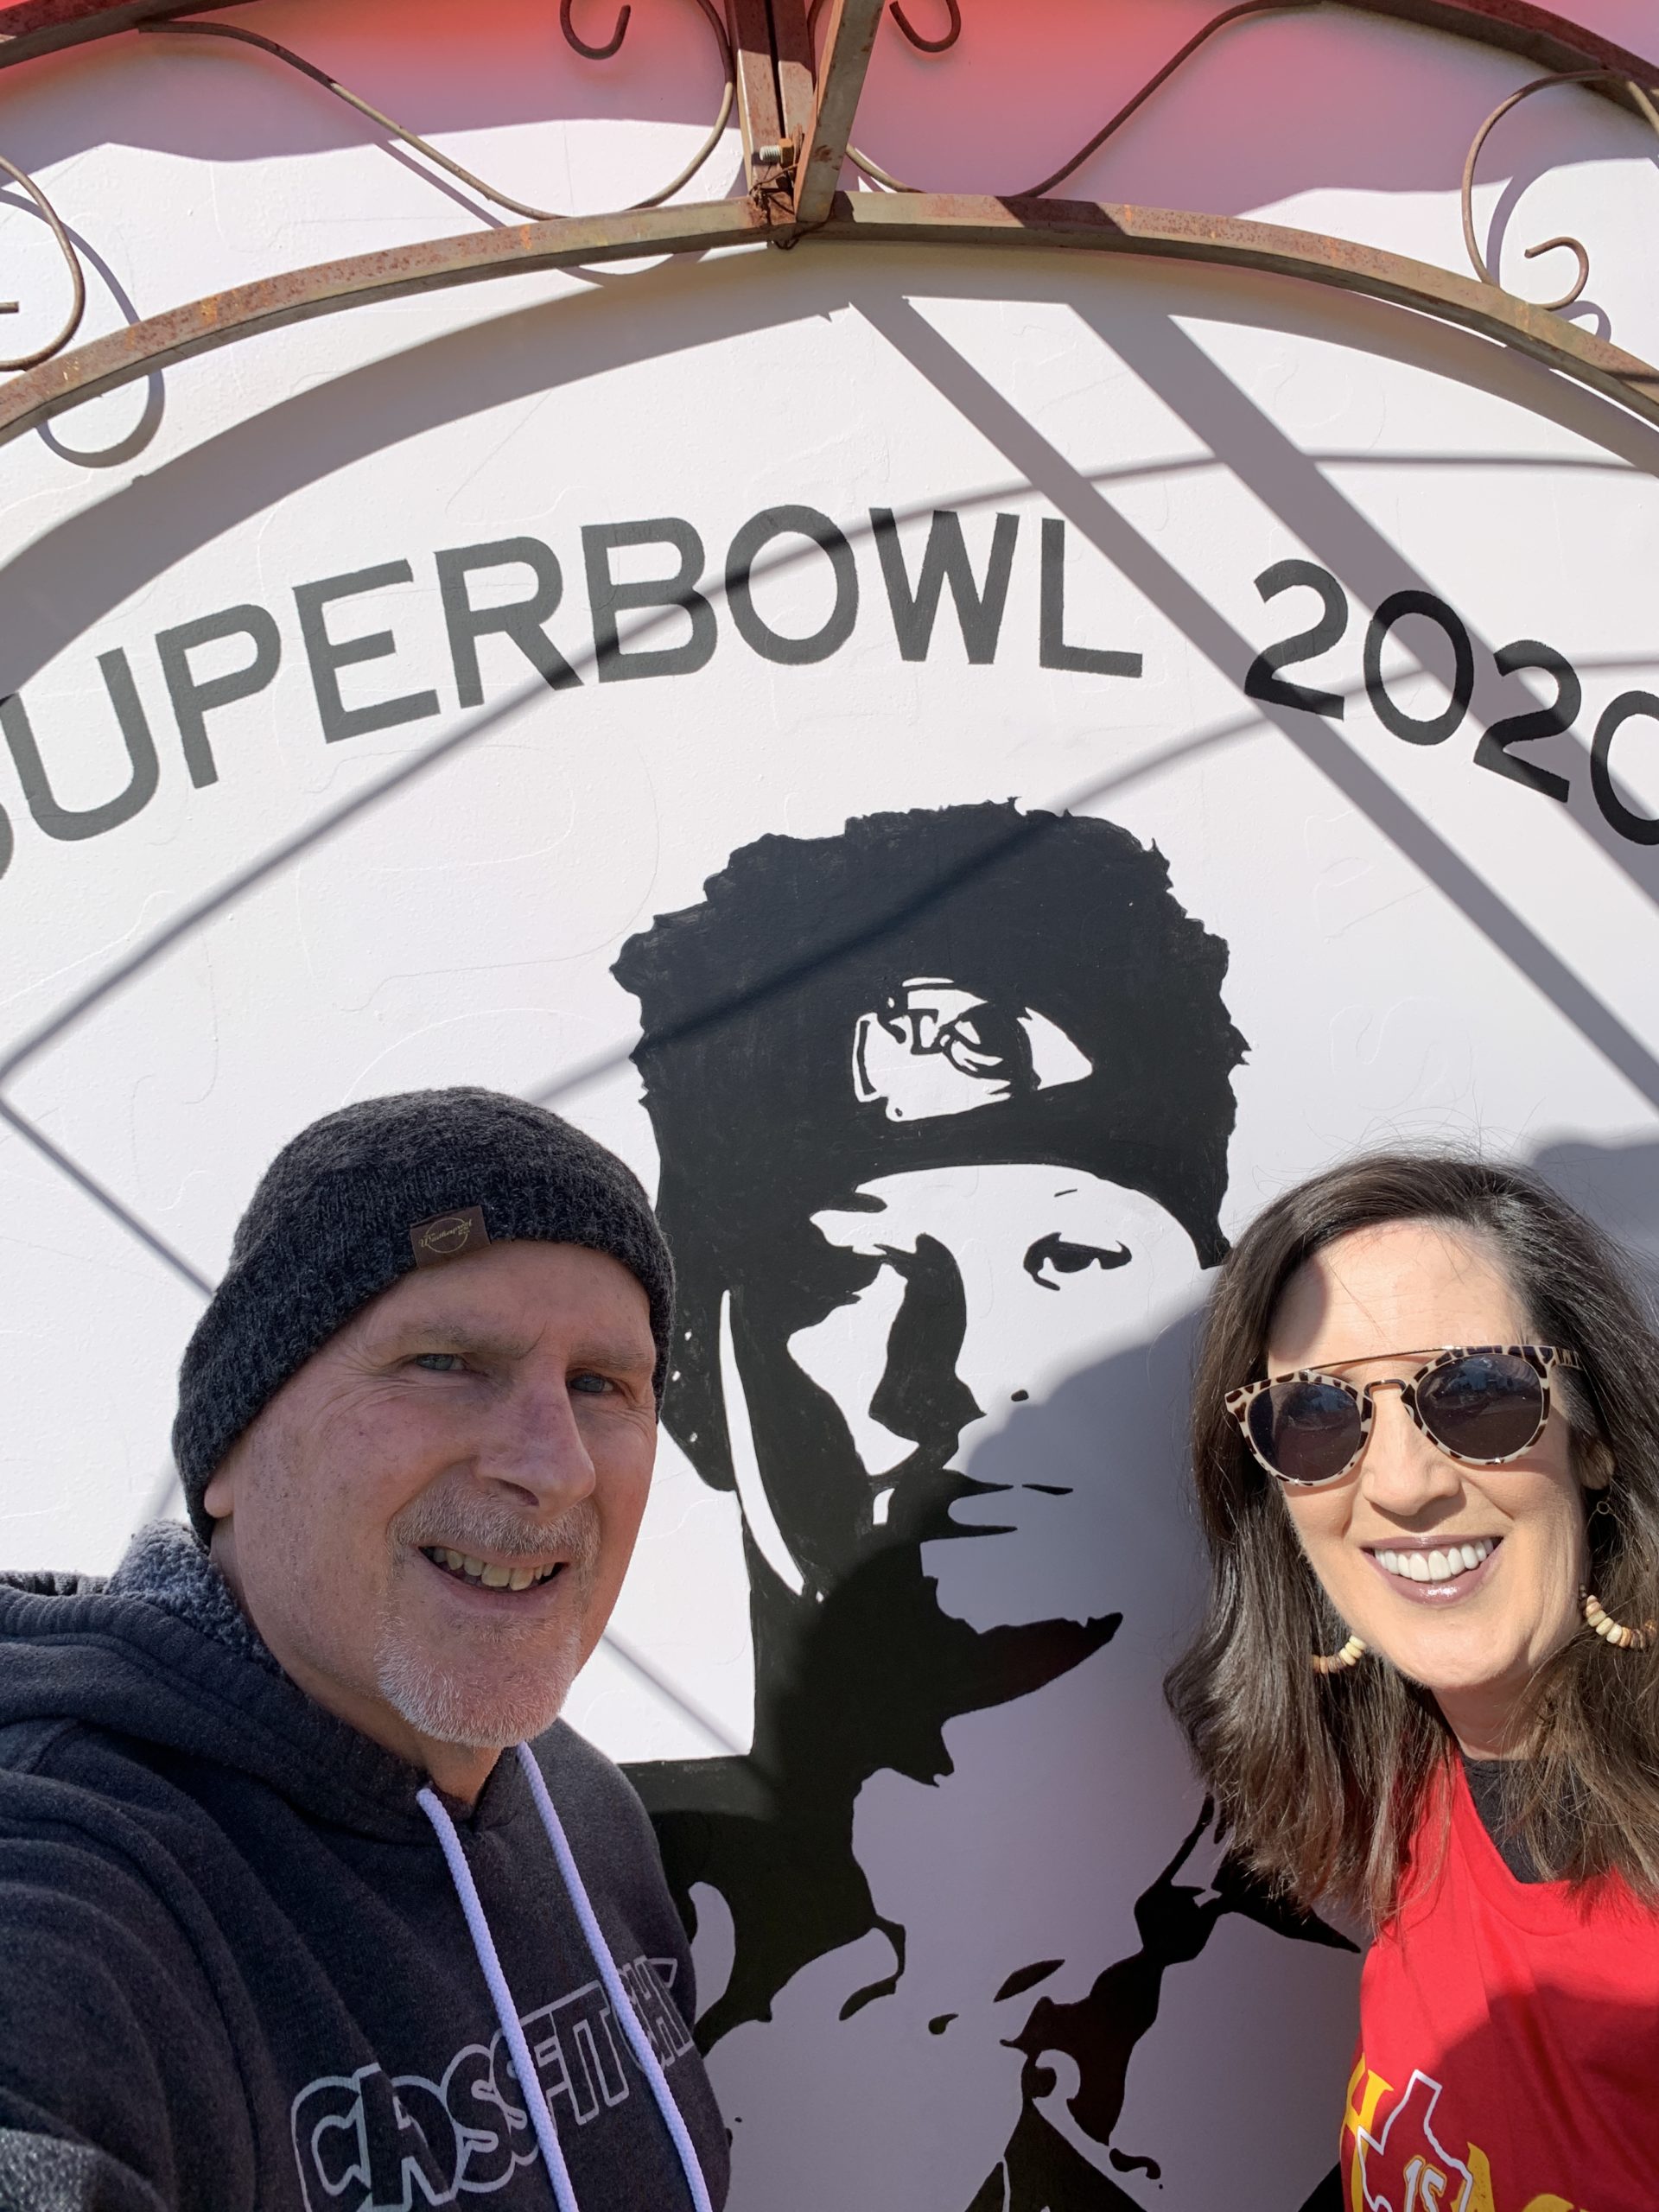 In front of Super Bowl 2020 photo prop